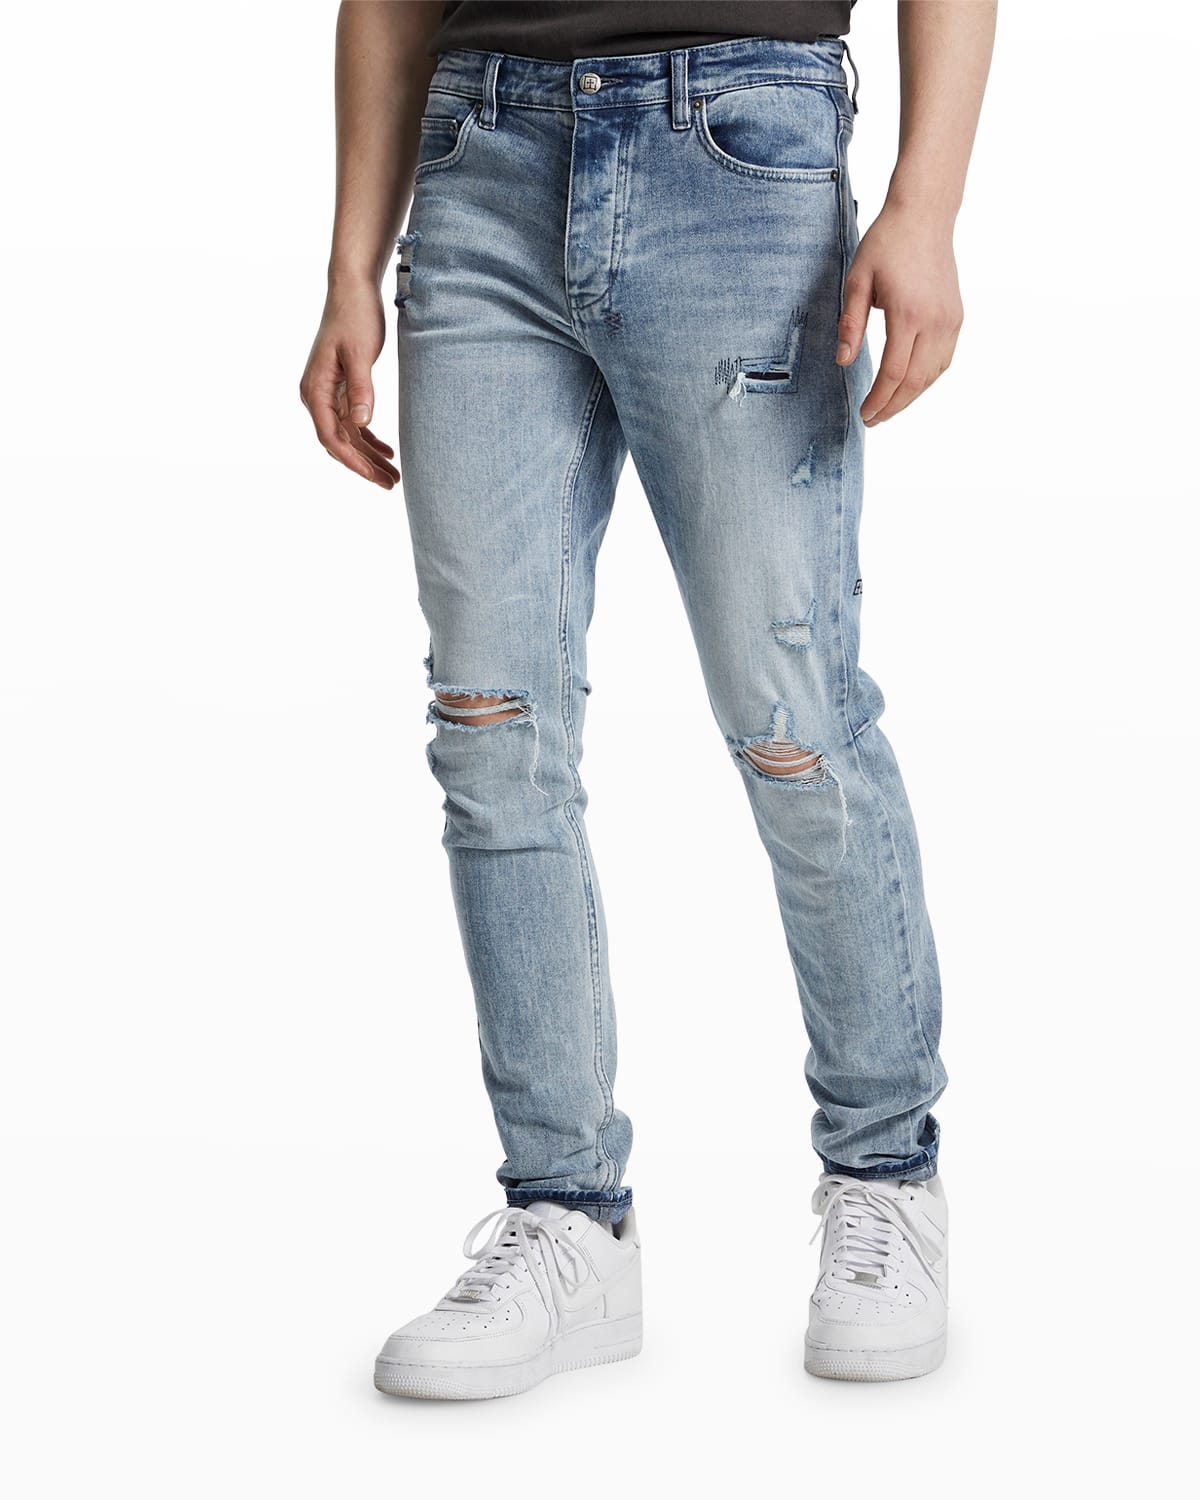 Men's Chitch Layover Trashed Jeans